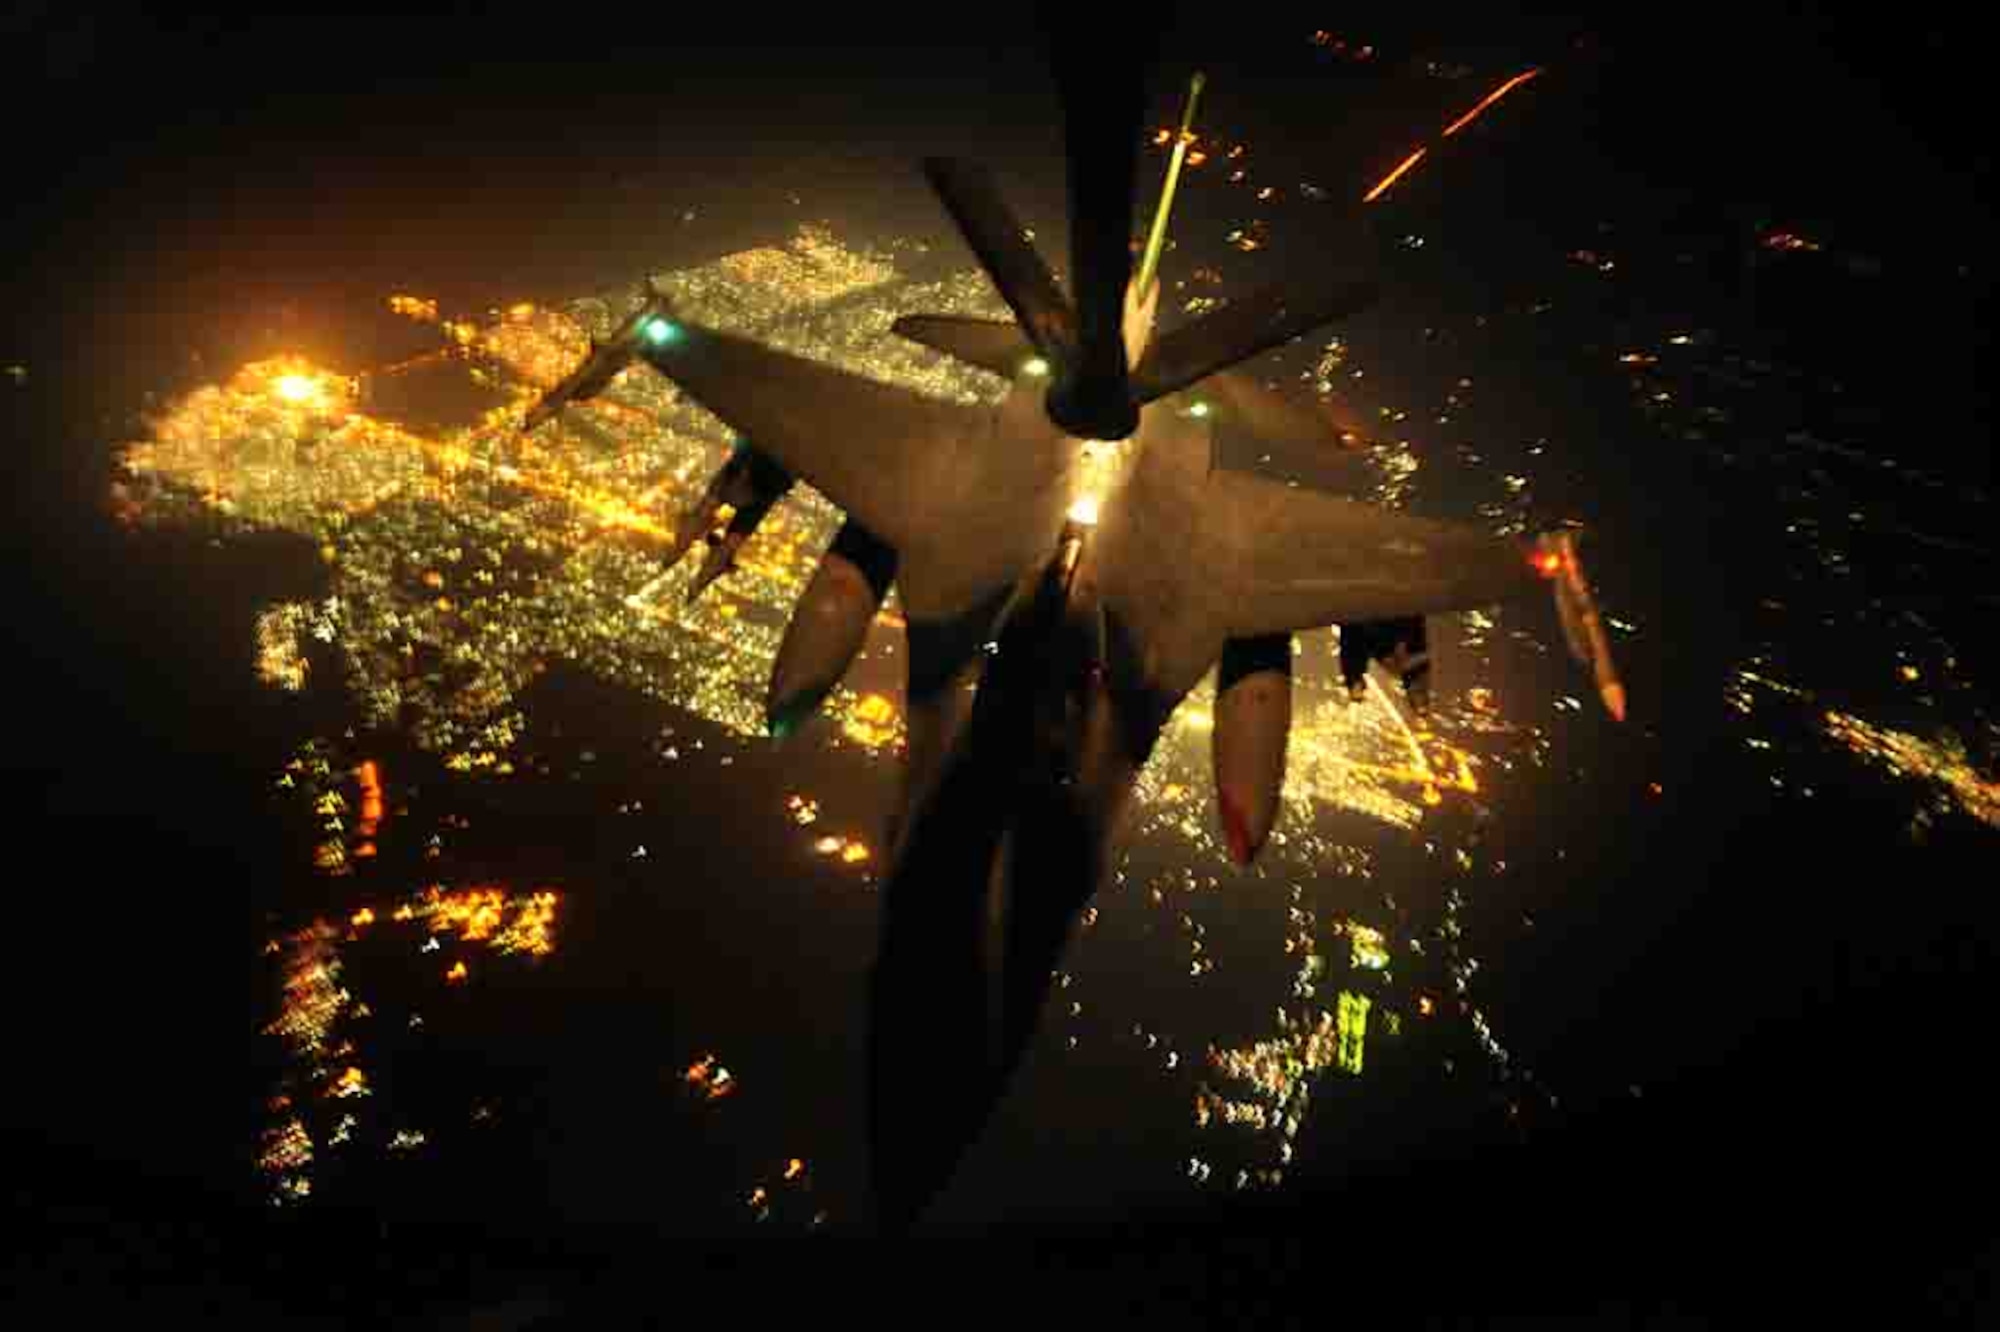 A U.S. Air Force  KC-135 Stratotanker from the 763rd Expiditionary Refueling Squadron in-refuels a U.S.Air Force F-16 Fighting Falcon from Joint Base Balad, Iraq during a combat mission over Iraq on Sept. 3, 2008. 
(Photo Cleared for Public Release)
(photo by SSgt Aaron Allmon II)